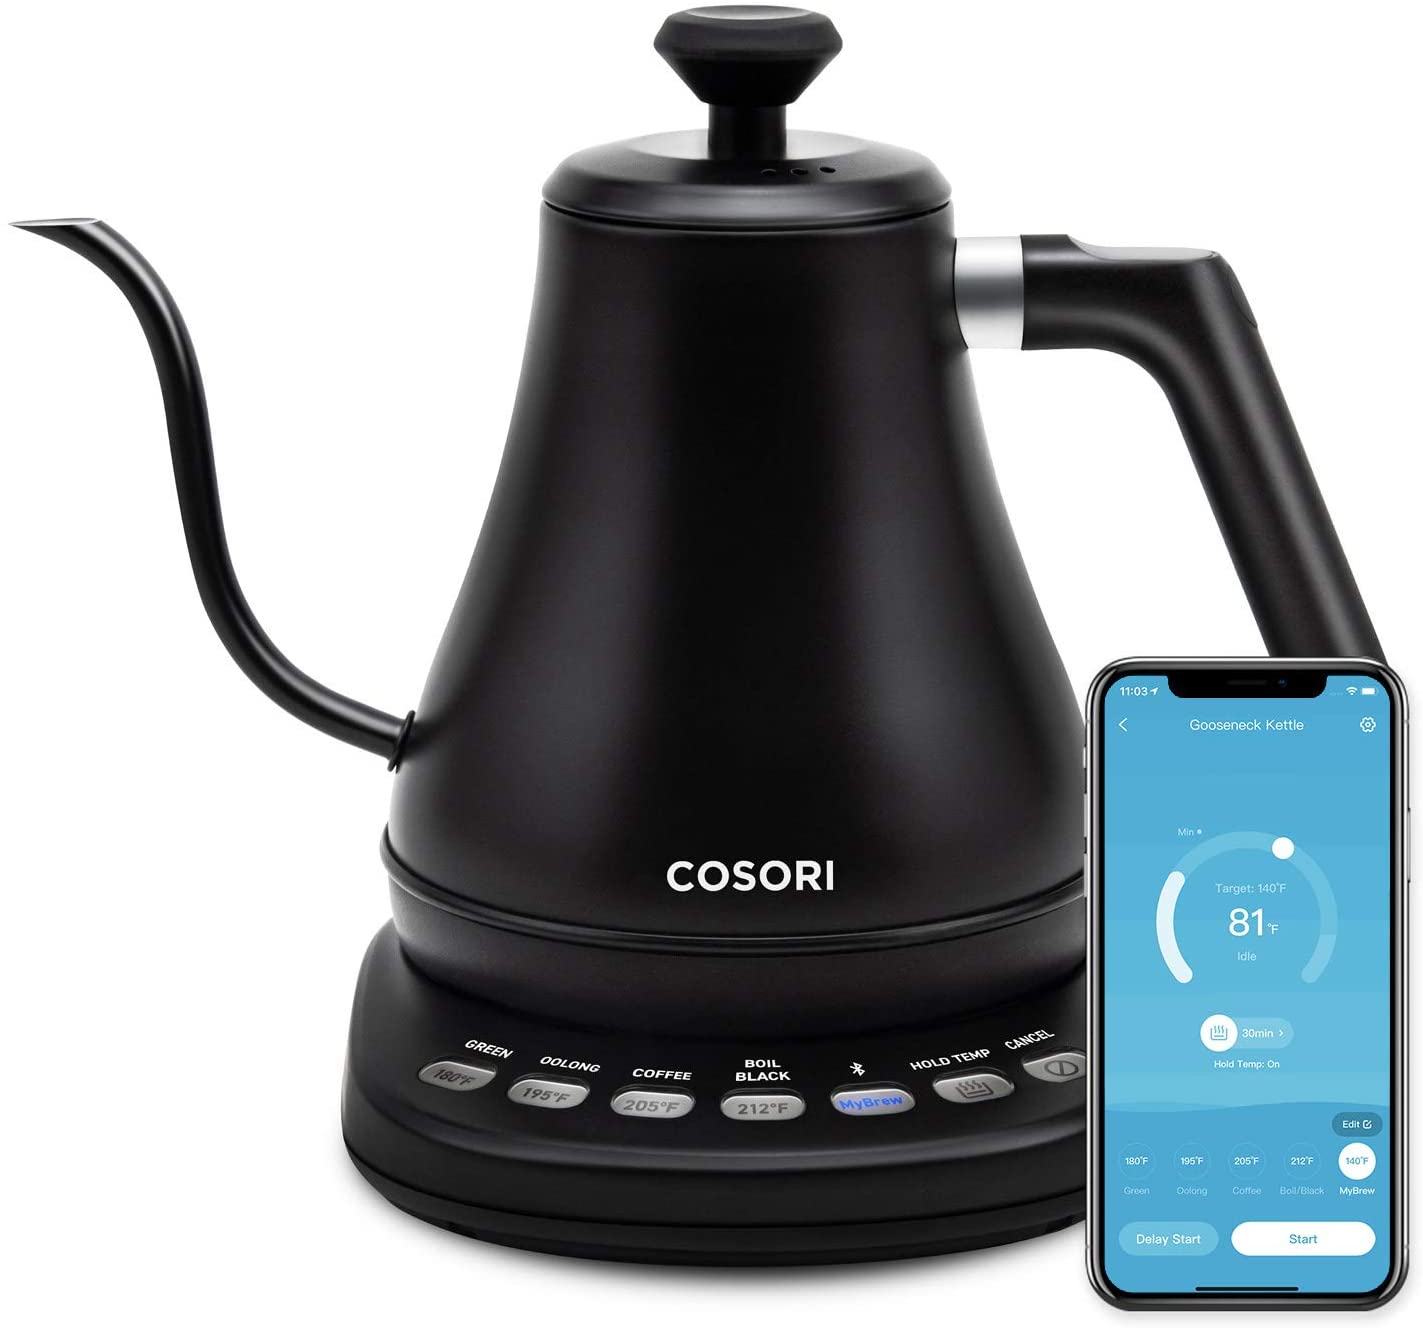 COSORI Rapid Boil Smart Electric Kettle For Coffee